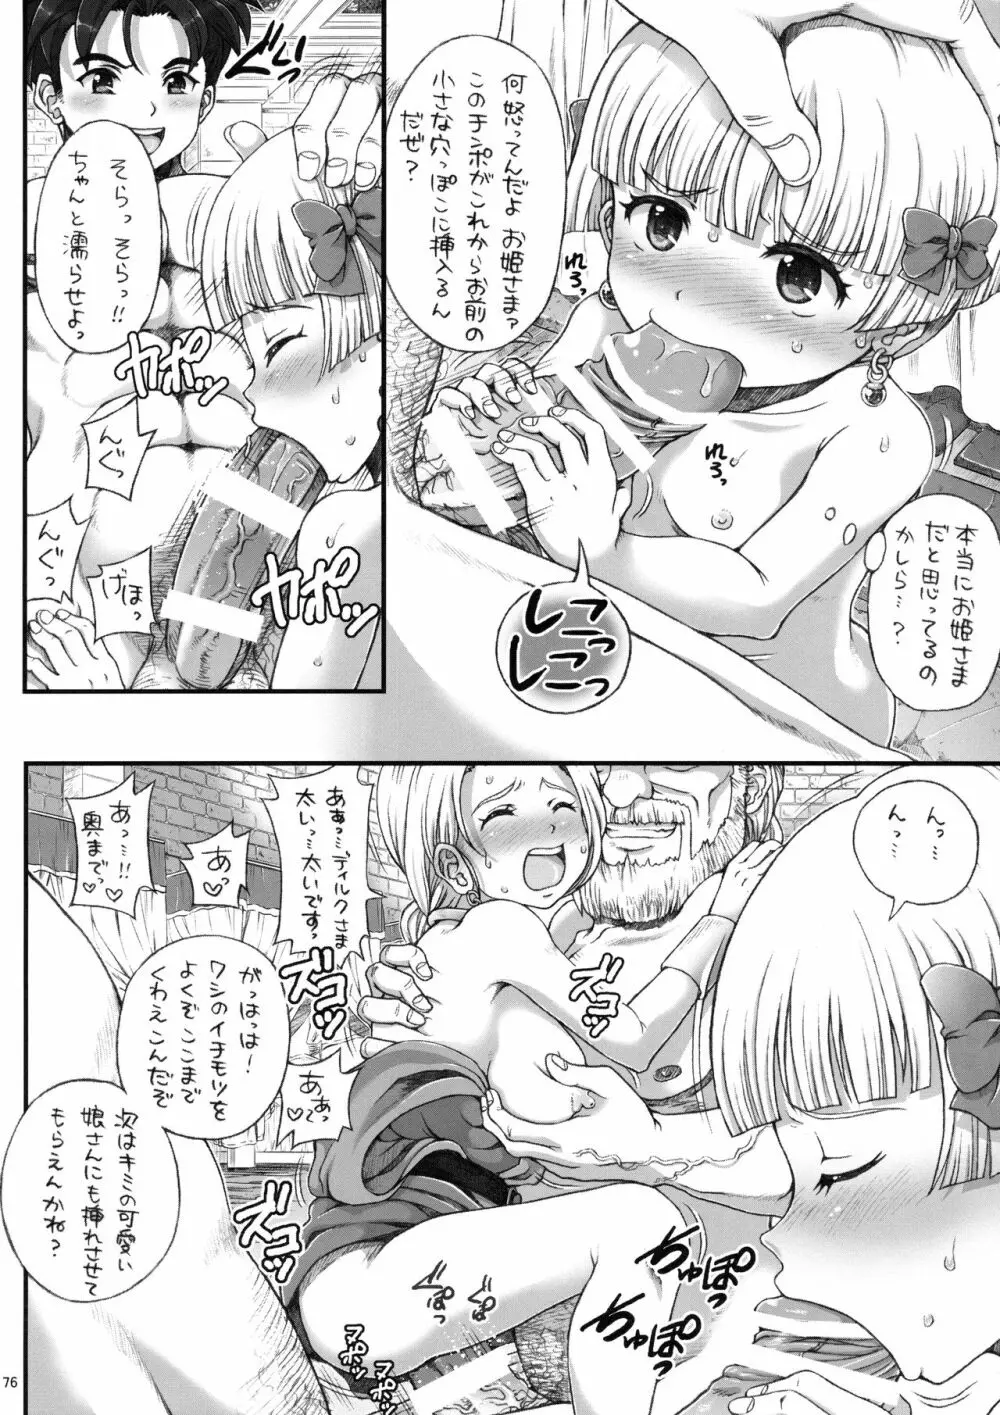 DQデリバリーヘルス総集編 - page76